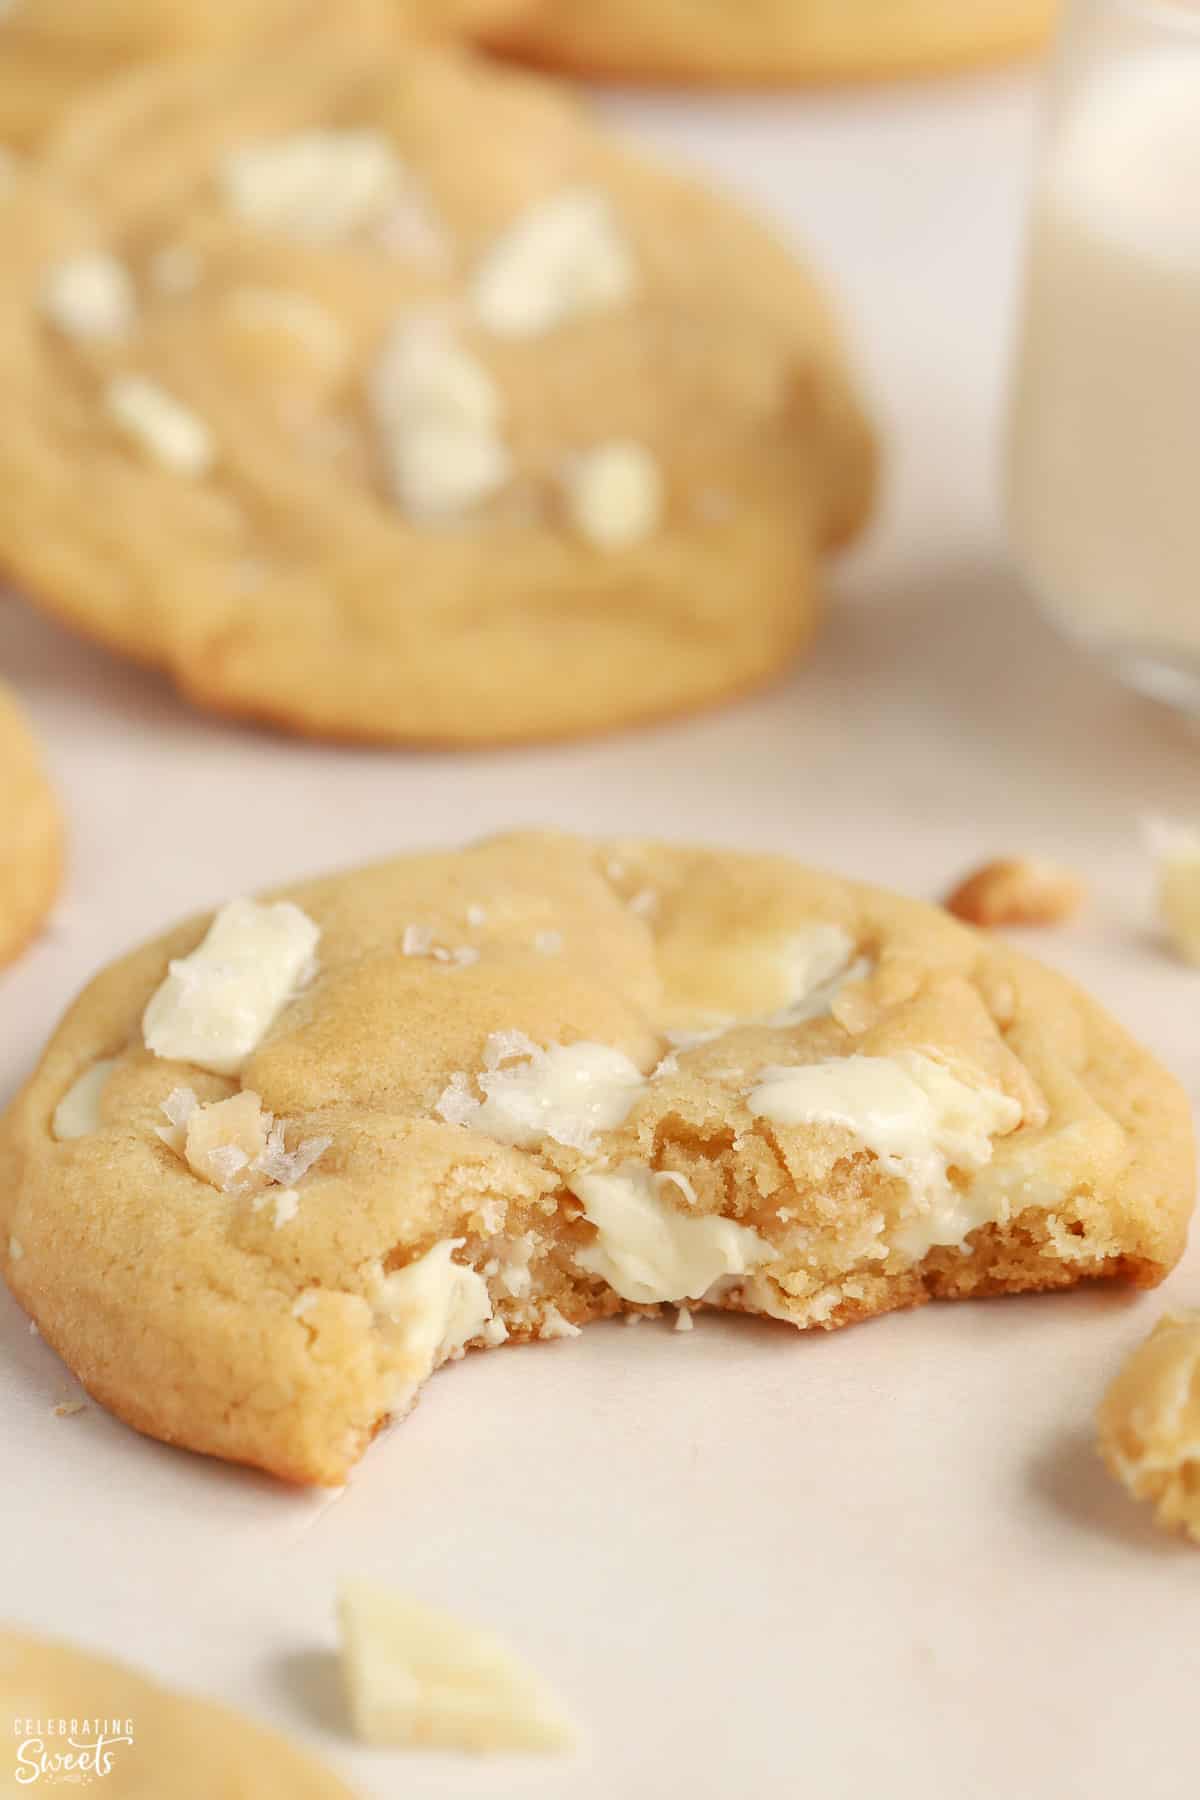 White chocolate macadamia nut cookie with a bite taken out of it.